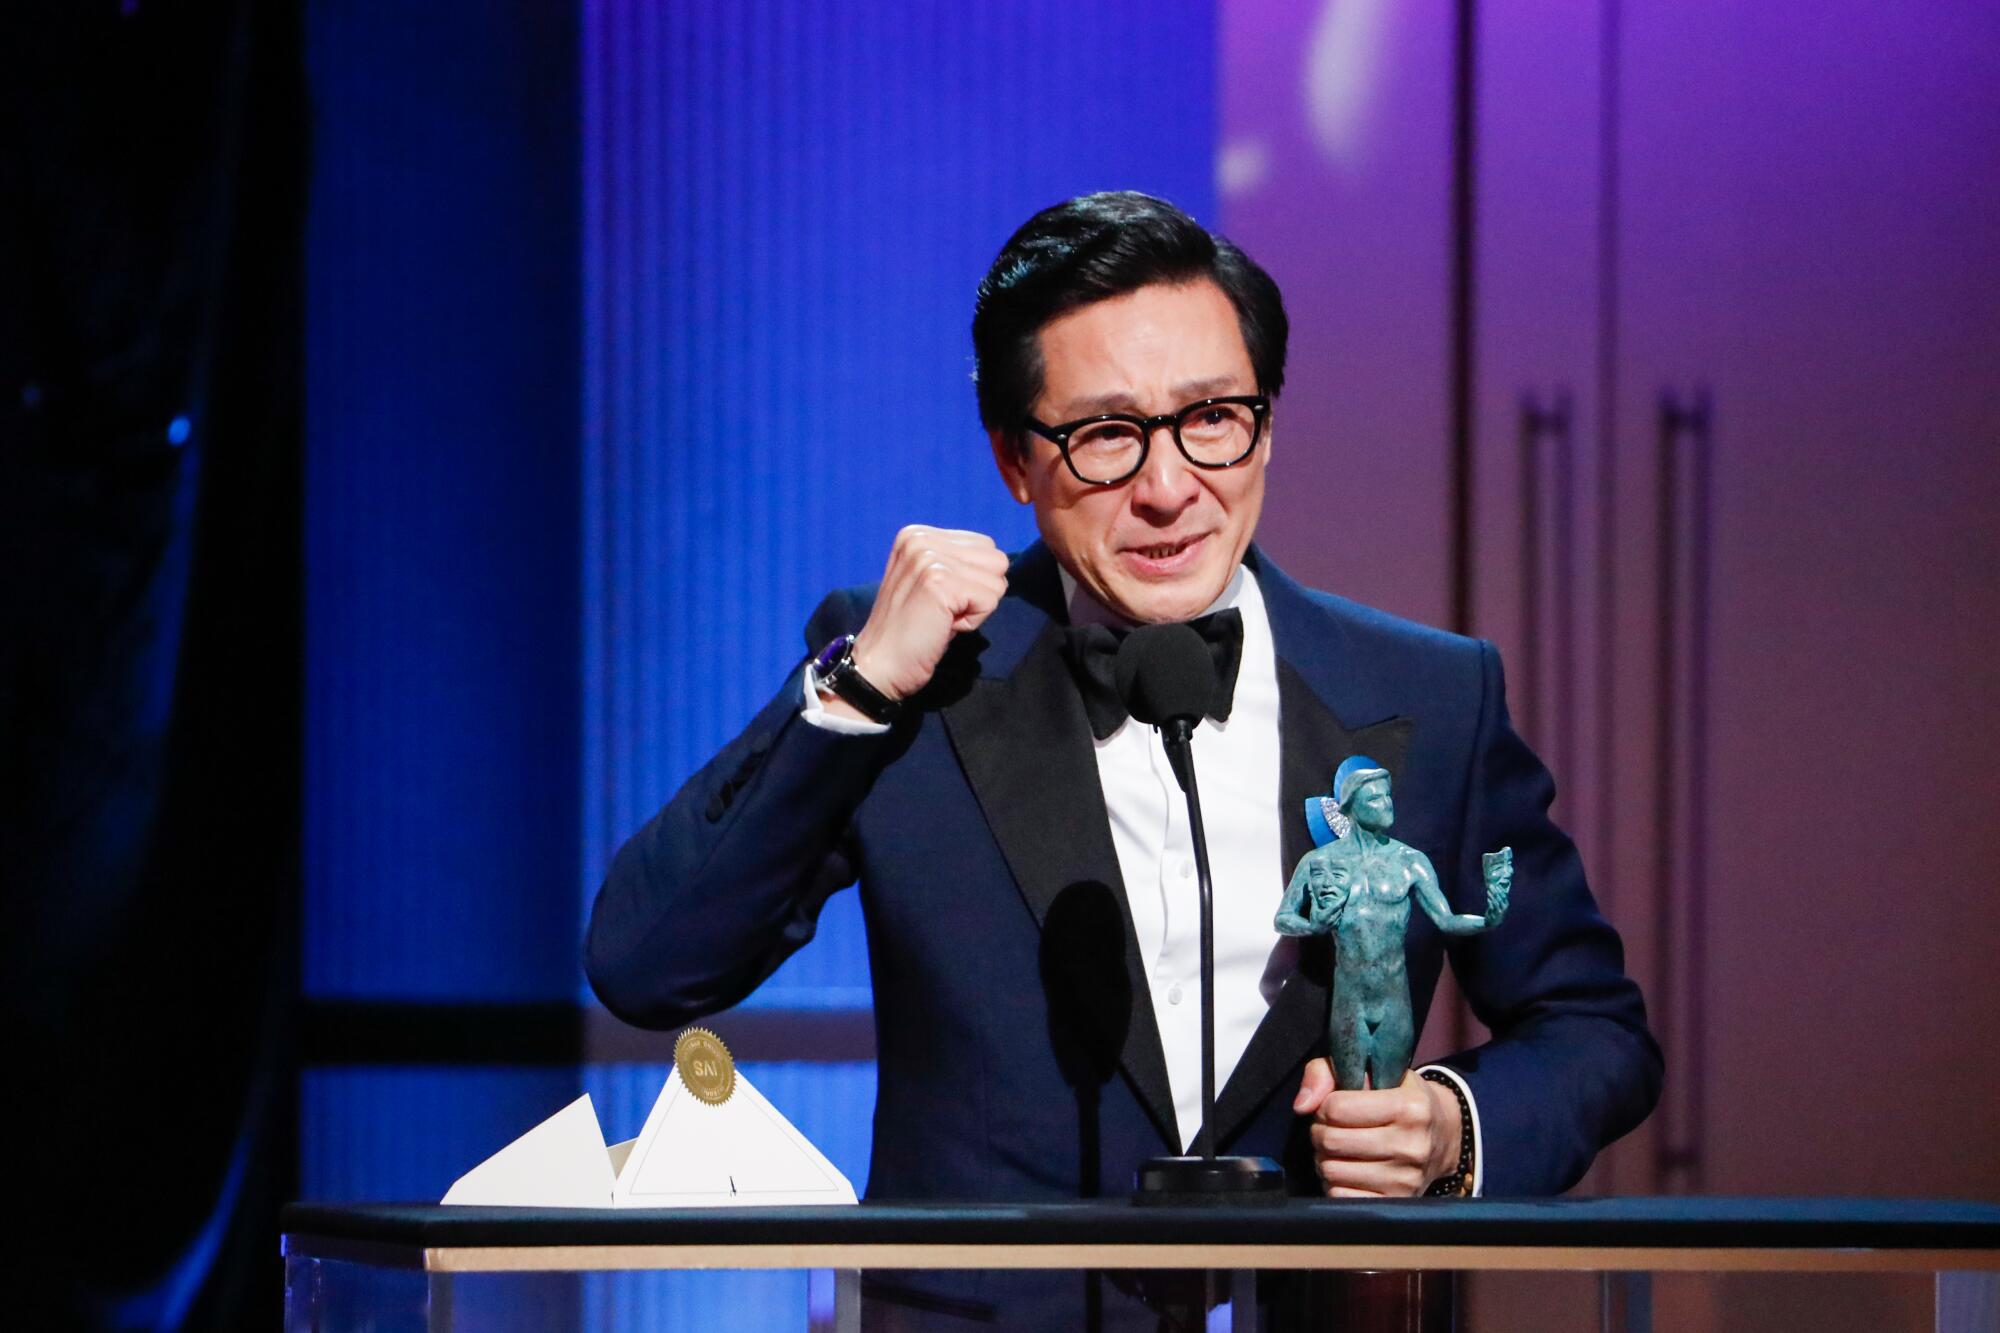 Ke Huy Quan accepts the award for male actor in a supporting role for "Everything Everywhere All at Once."